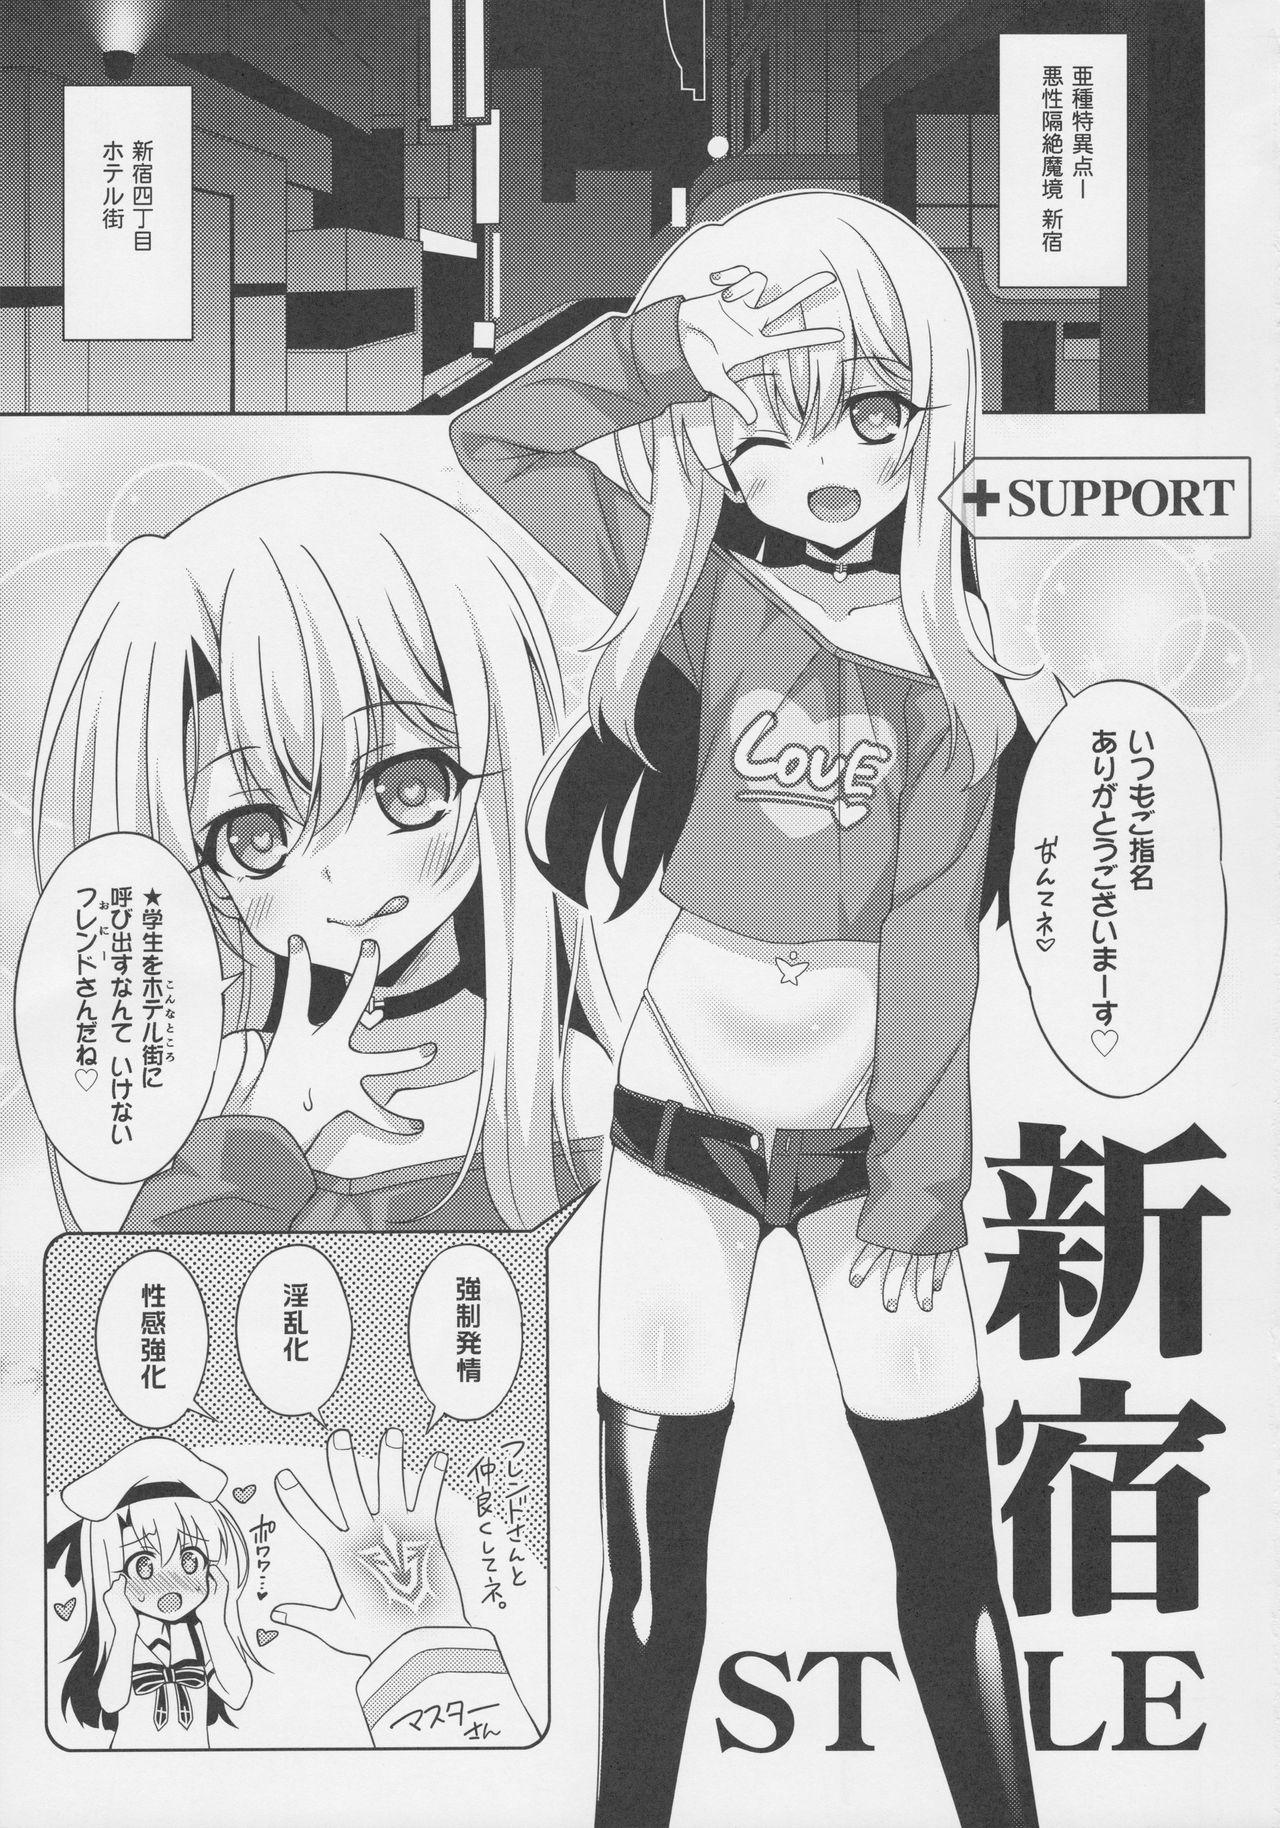 Mouth Illya-chan no Dosukebe Suppox - Fate grand order German - Page 4